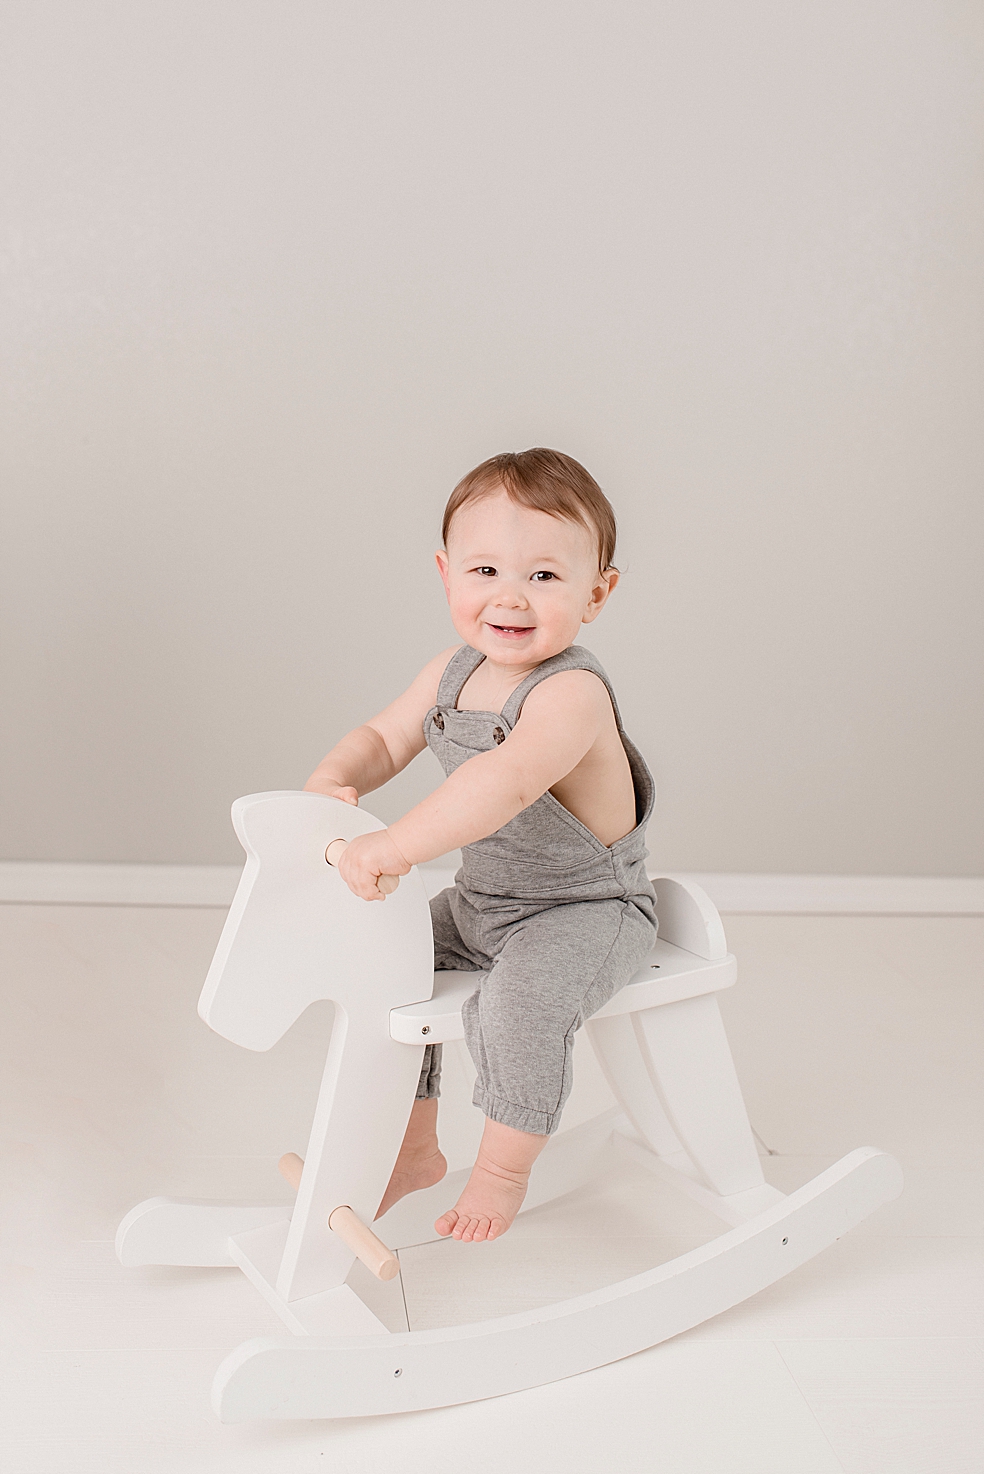 Baby boy in gray jumper sitting on white rocking horse | Photo by Jessica Lee Photography